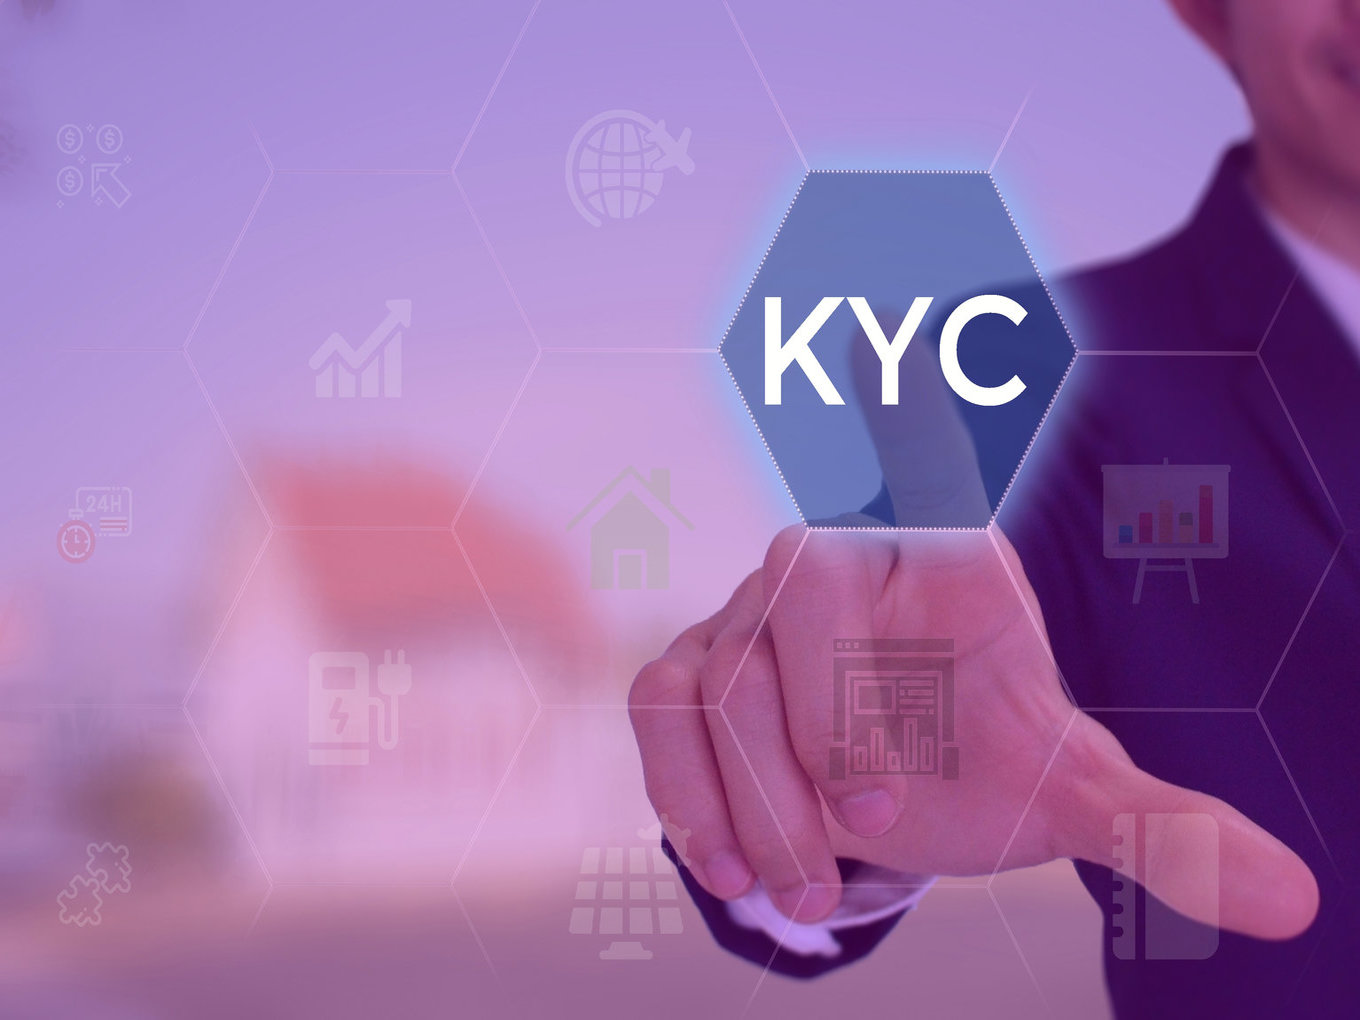 Union Budget 2020: Uber, Paytm & Co Demand Streamlining Of KYC Norms